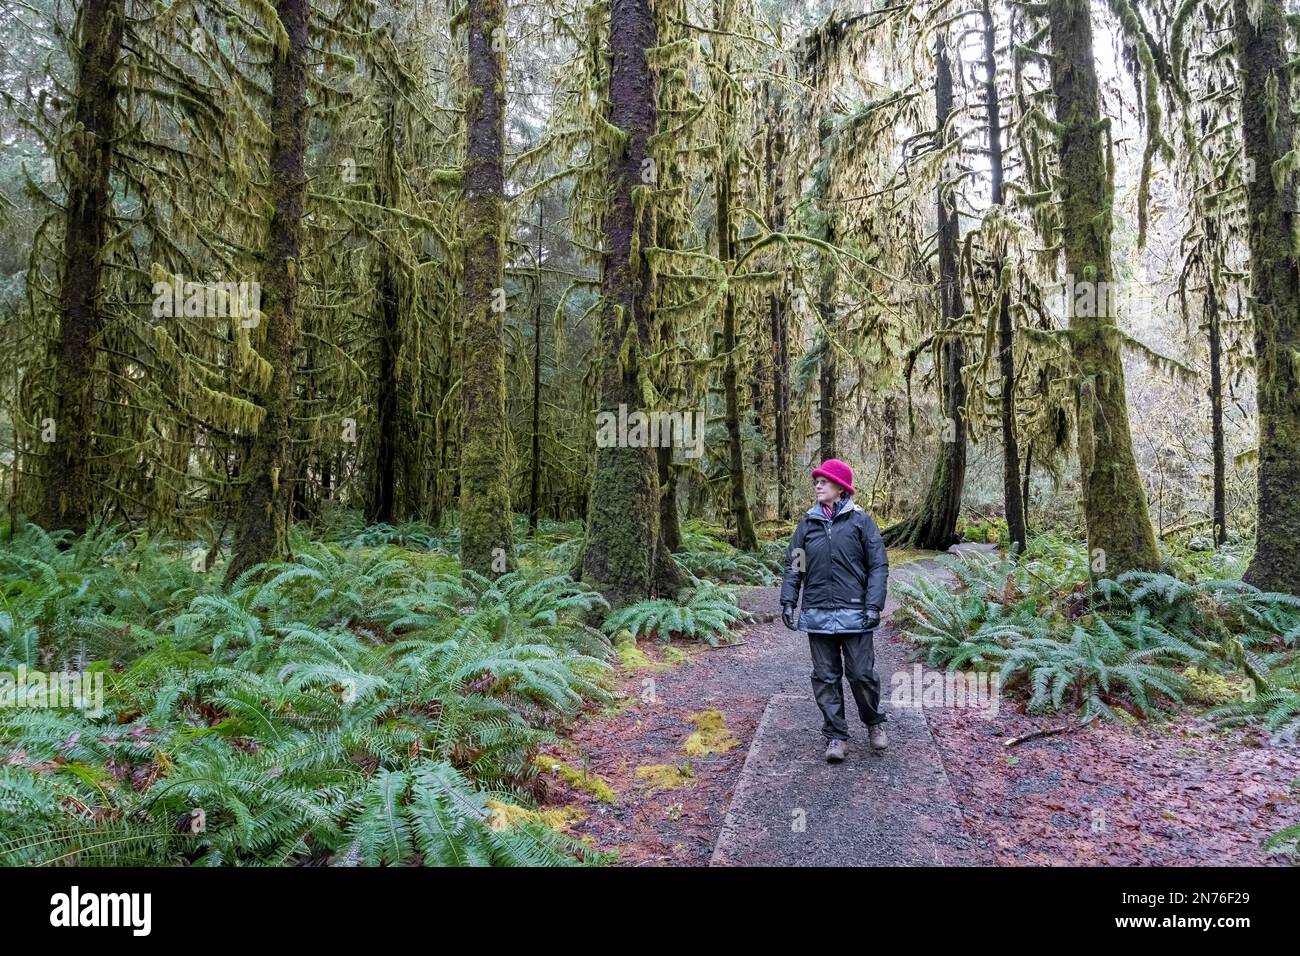 Hoh Rain Forest, Olympic National Park, Washington, USA.   Woman walking on the Spruce nature trail full of moss-covered Douglas Fir trees and Western Stock Photo